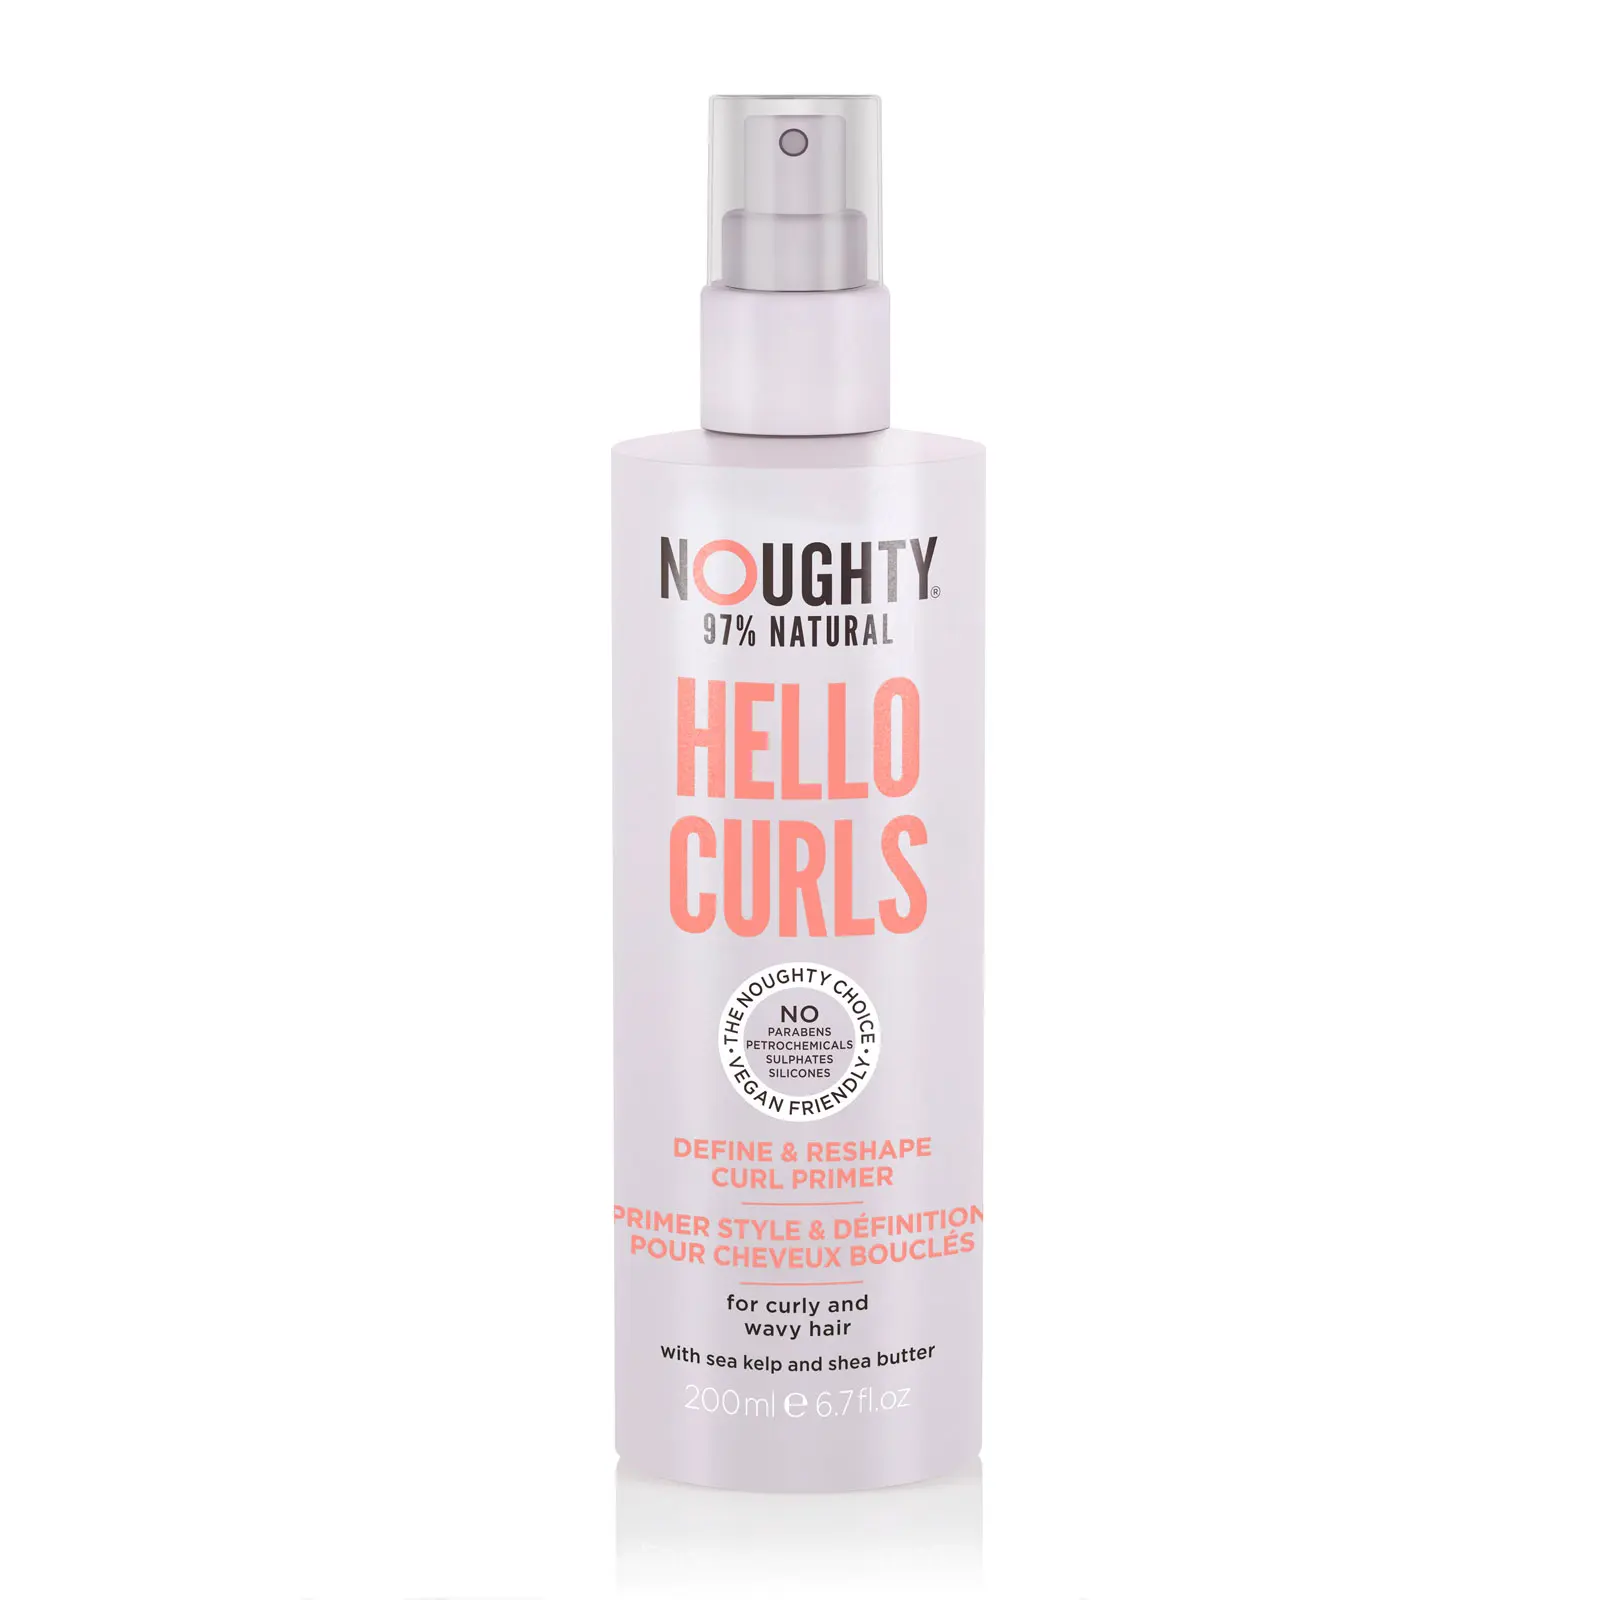 Noughty Hello Curls Define & Reshape Curl Primer 200ml Discounts and Cashback